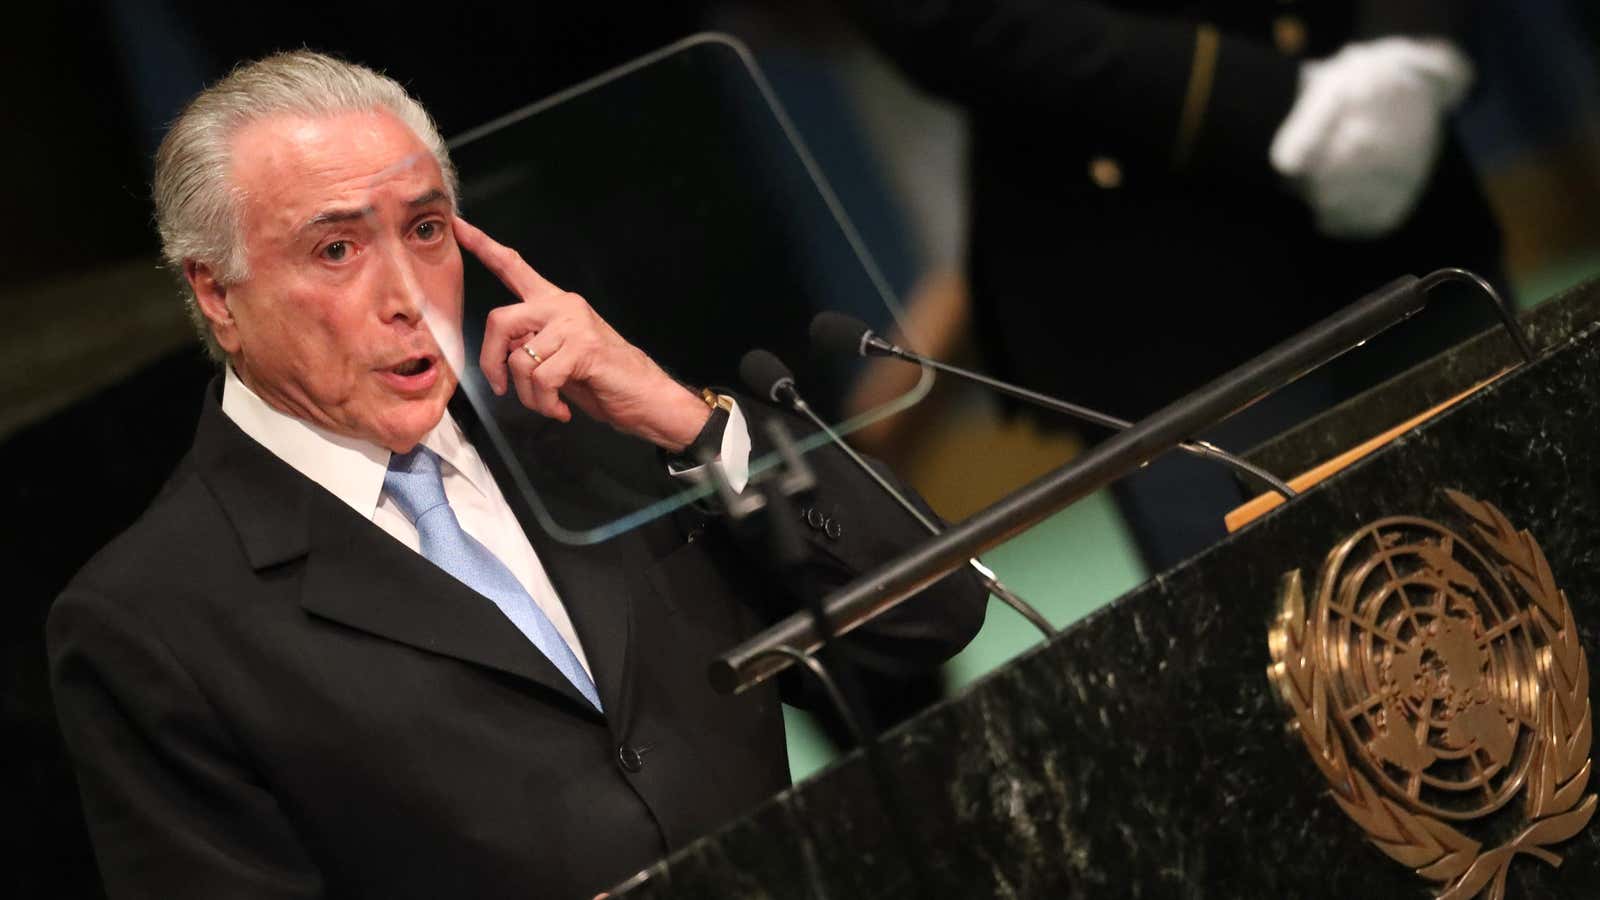 Temer gets the first word.